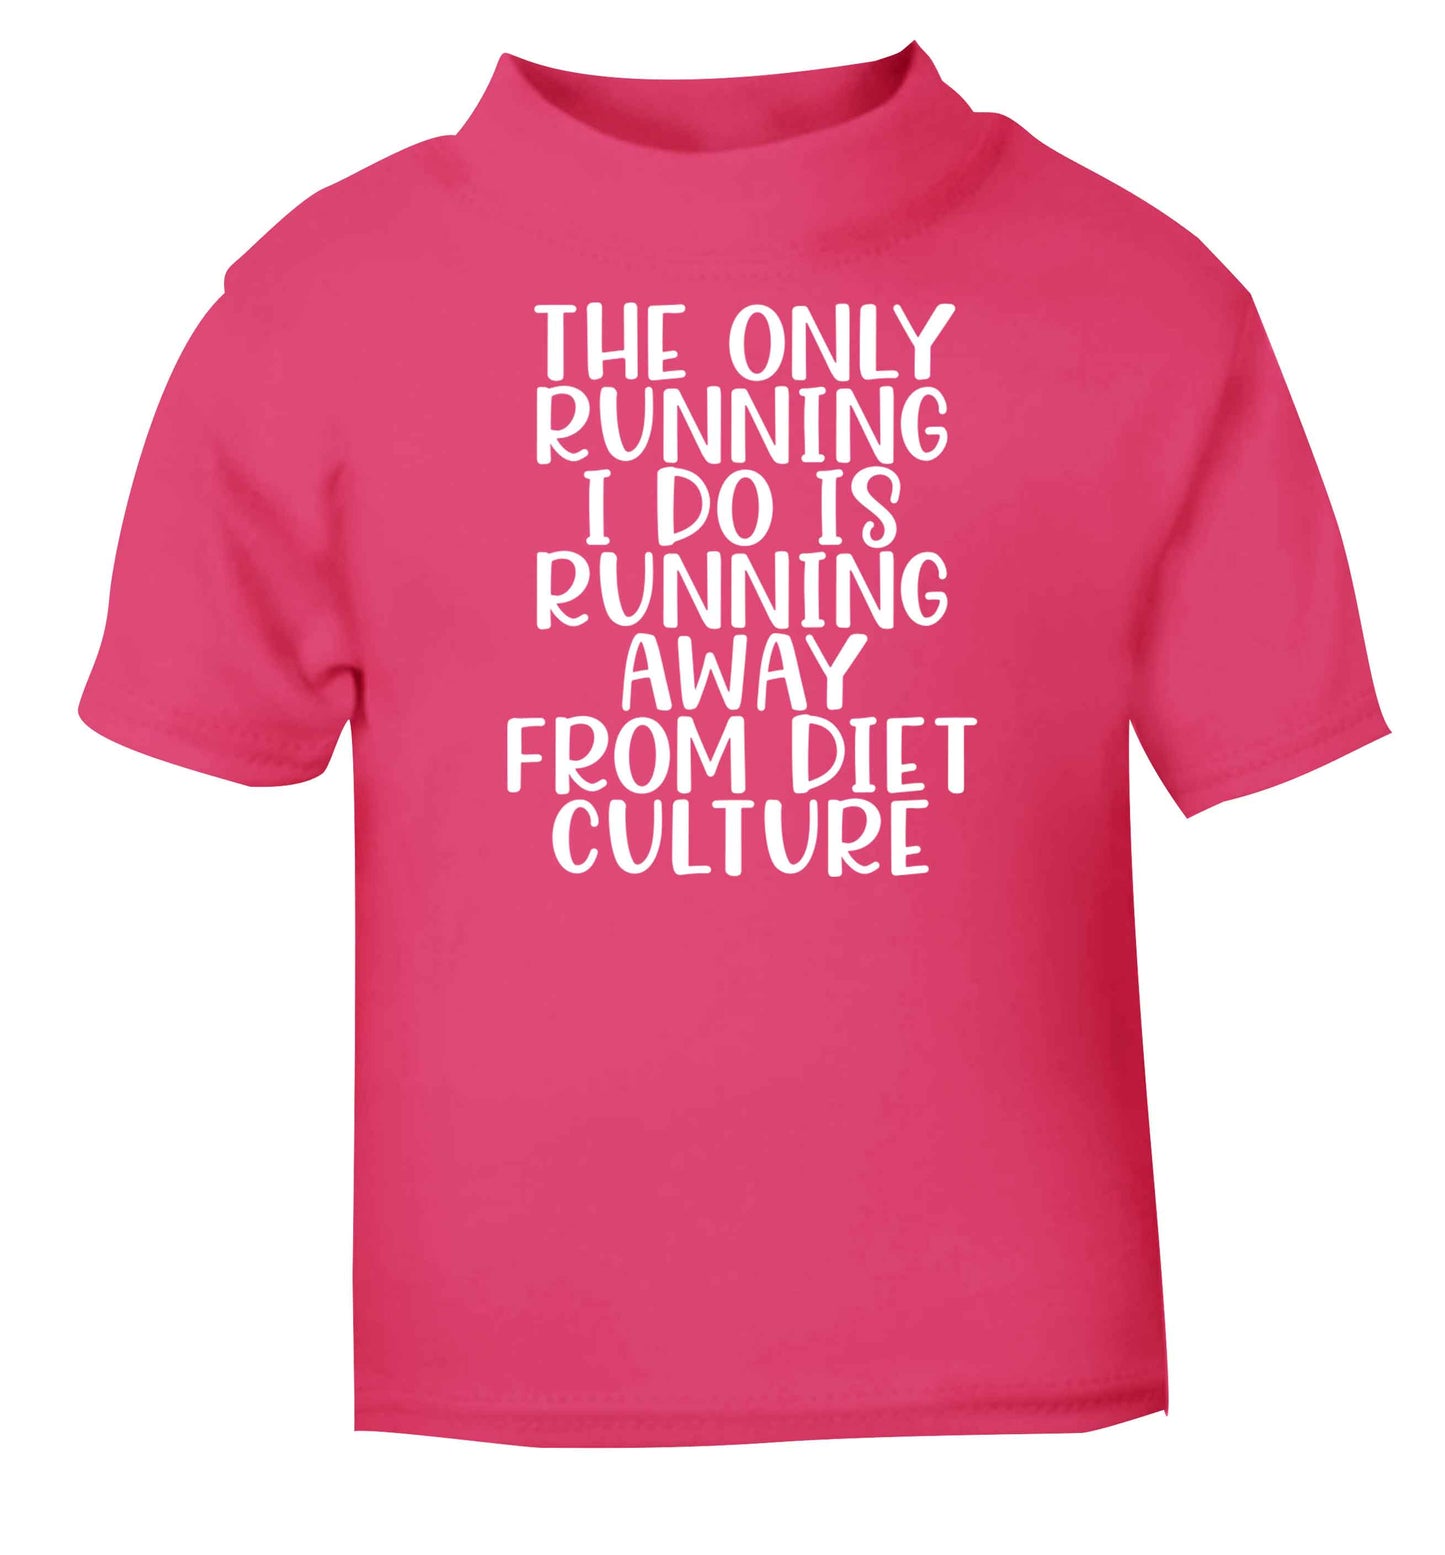 The only running I do is running away from diet culture pink baby toddler Tshirt 2 Years